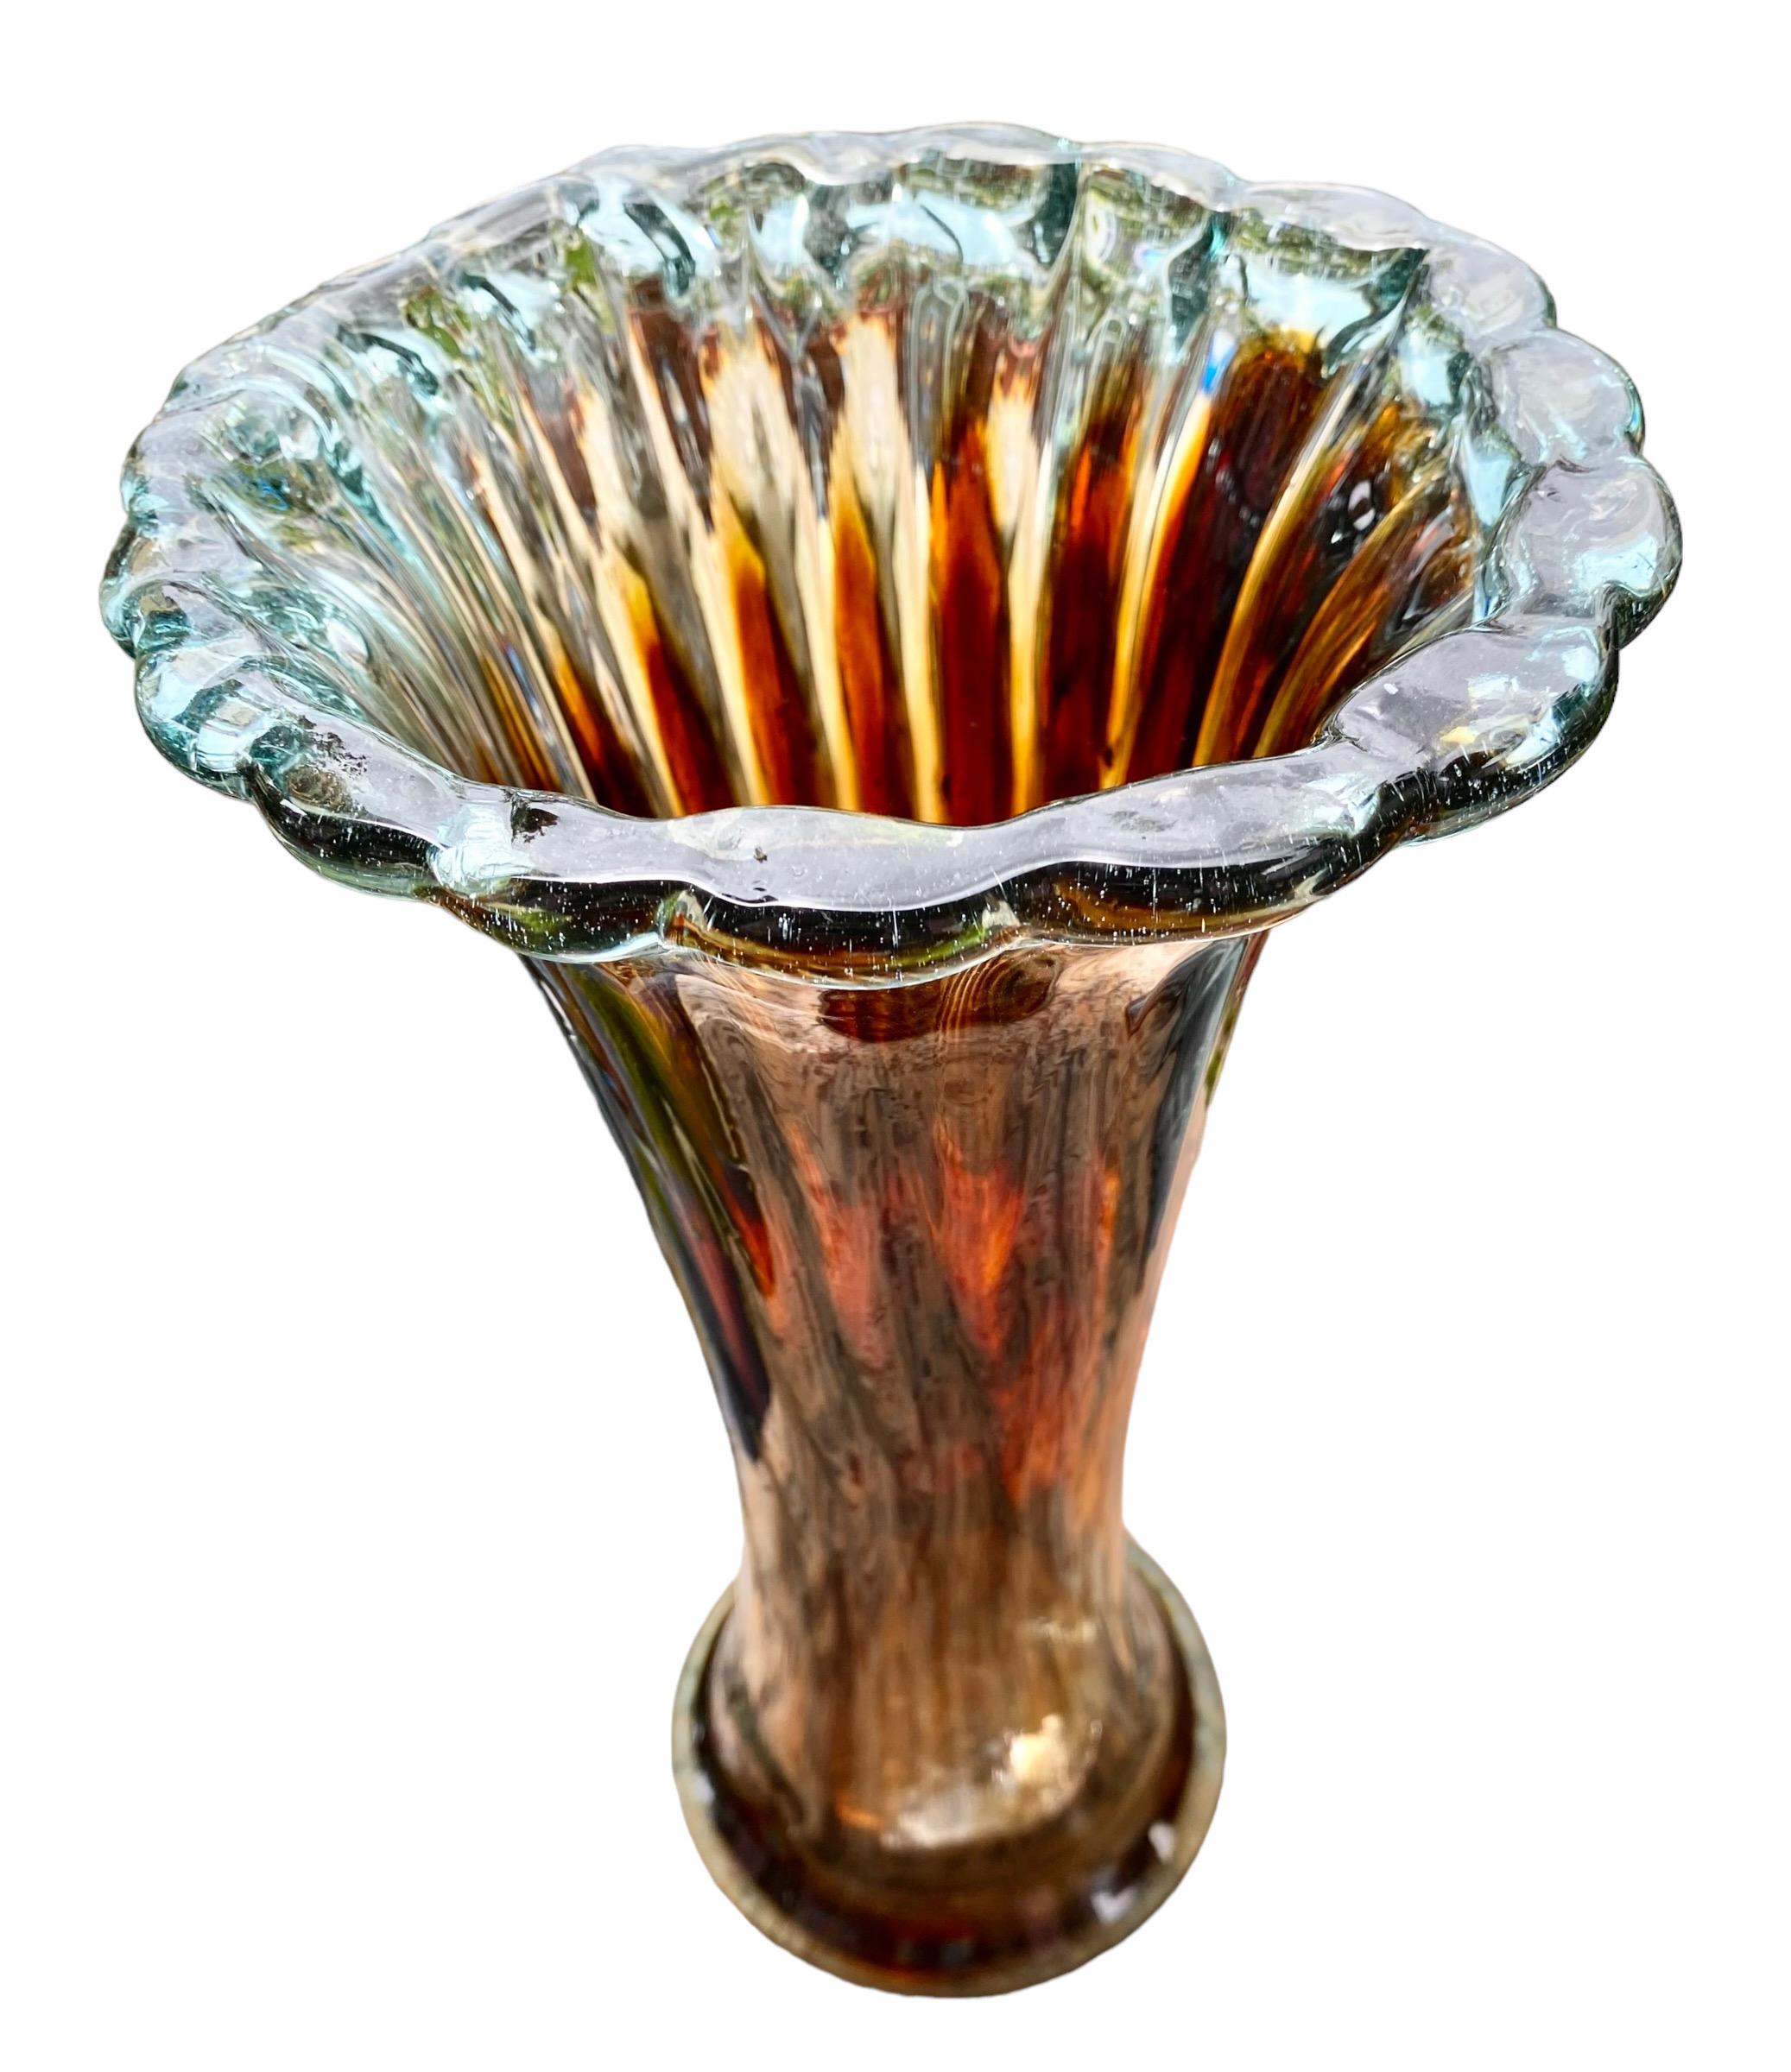 A vintage Bohemian hand blown art glass flower vase having a lovely ribbed design and ruffled top in shades of brown and tints of blue. Ready for your colorful display of fresh flowers.   